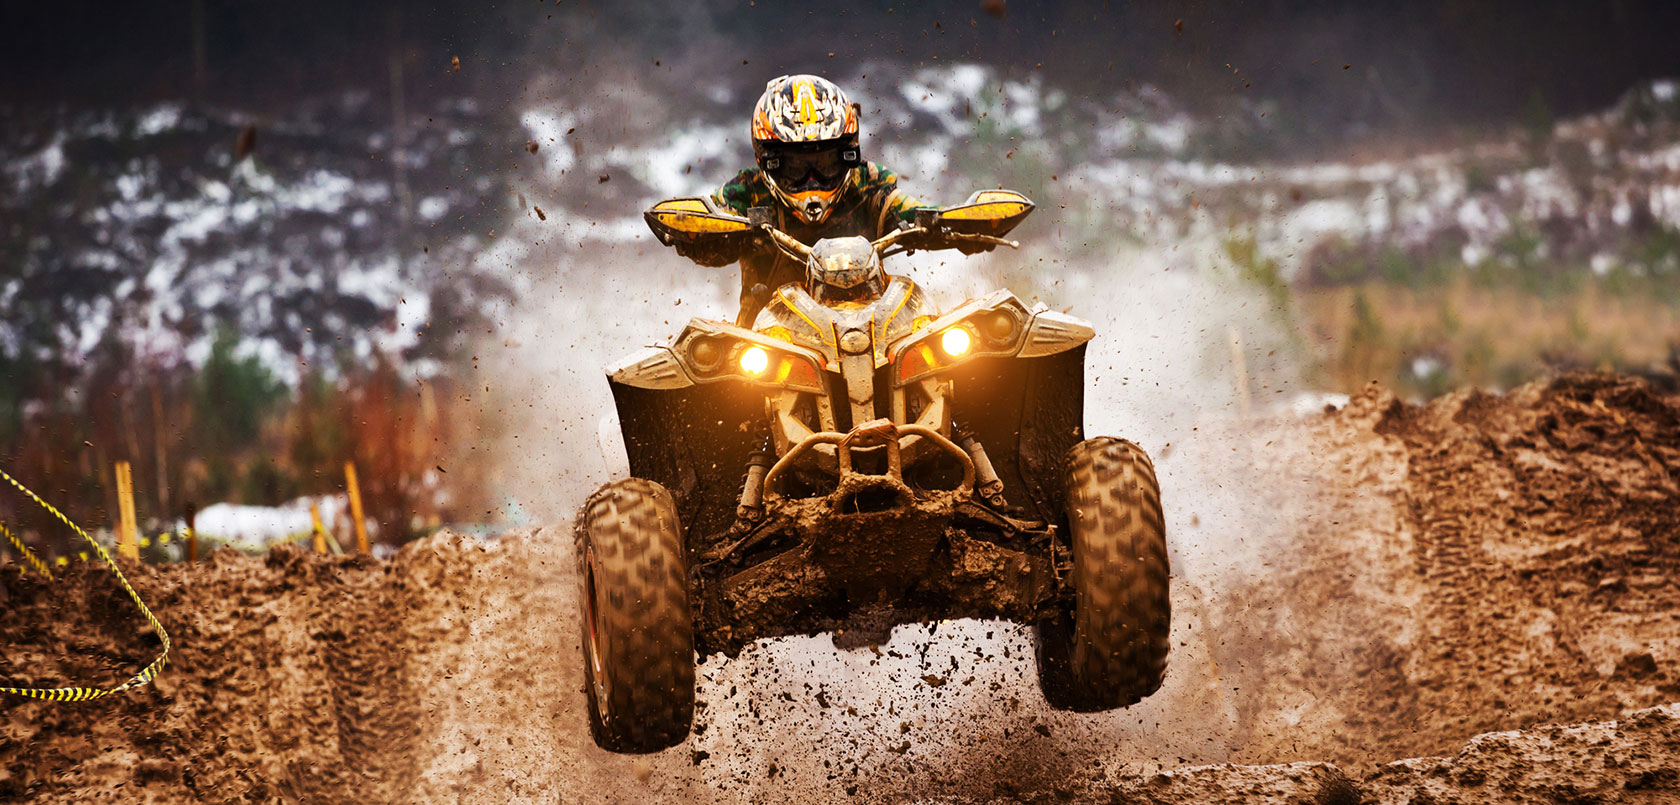 4 Steps to Take After an ATV Accident